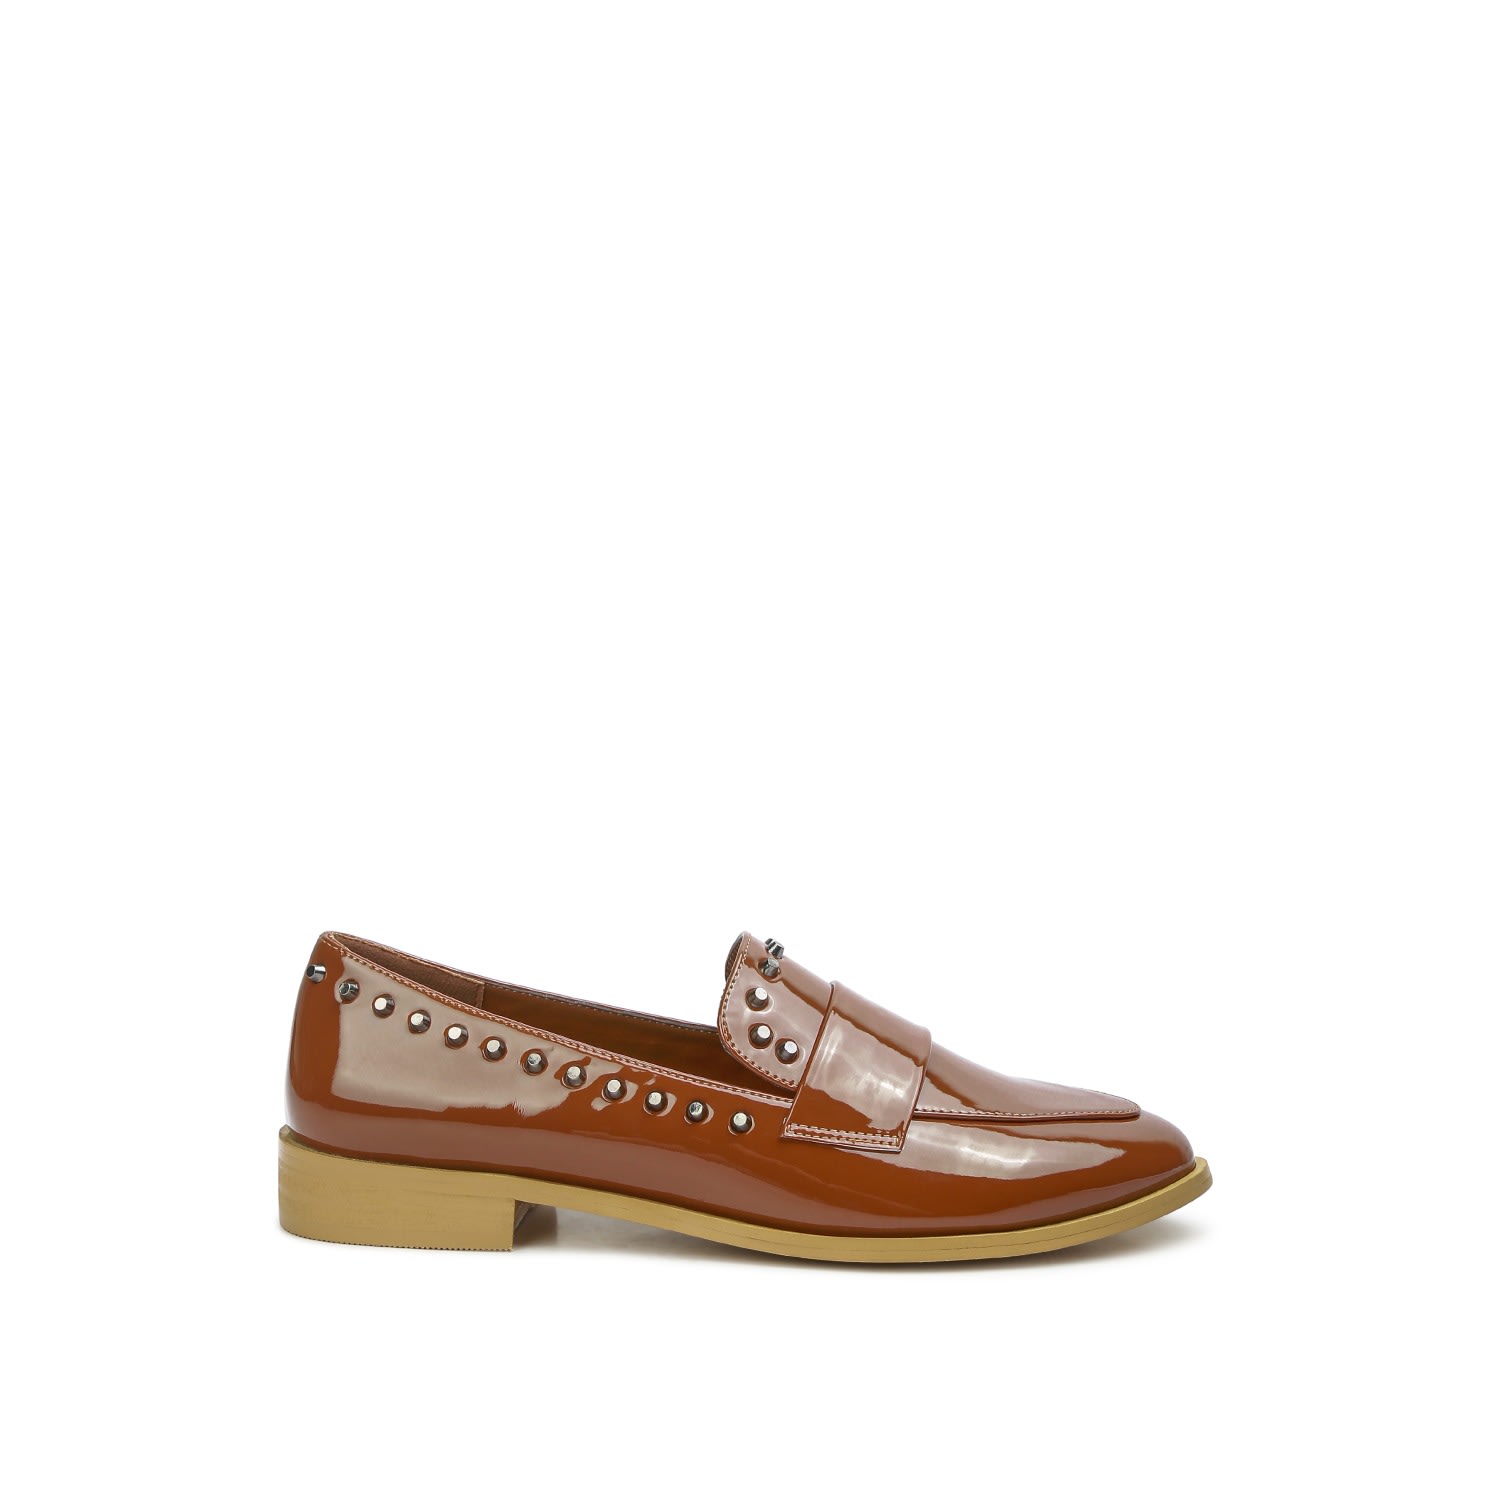 Rag & Co Women's Brown Emilia Tan Patent Stud Penny Loafers